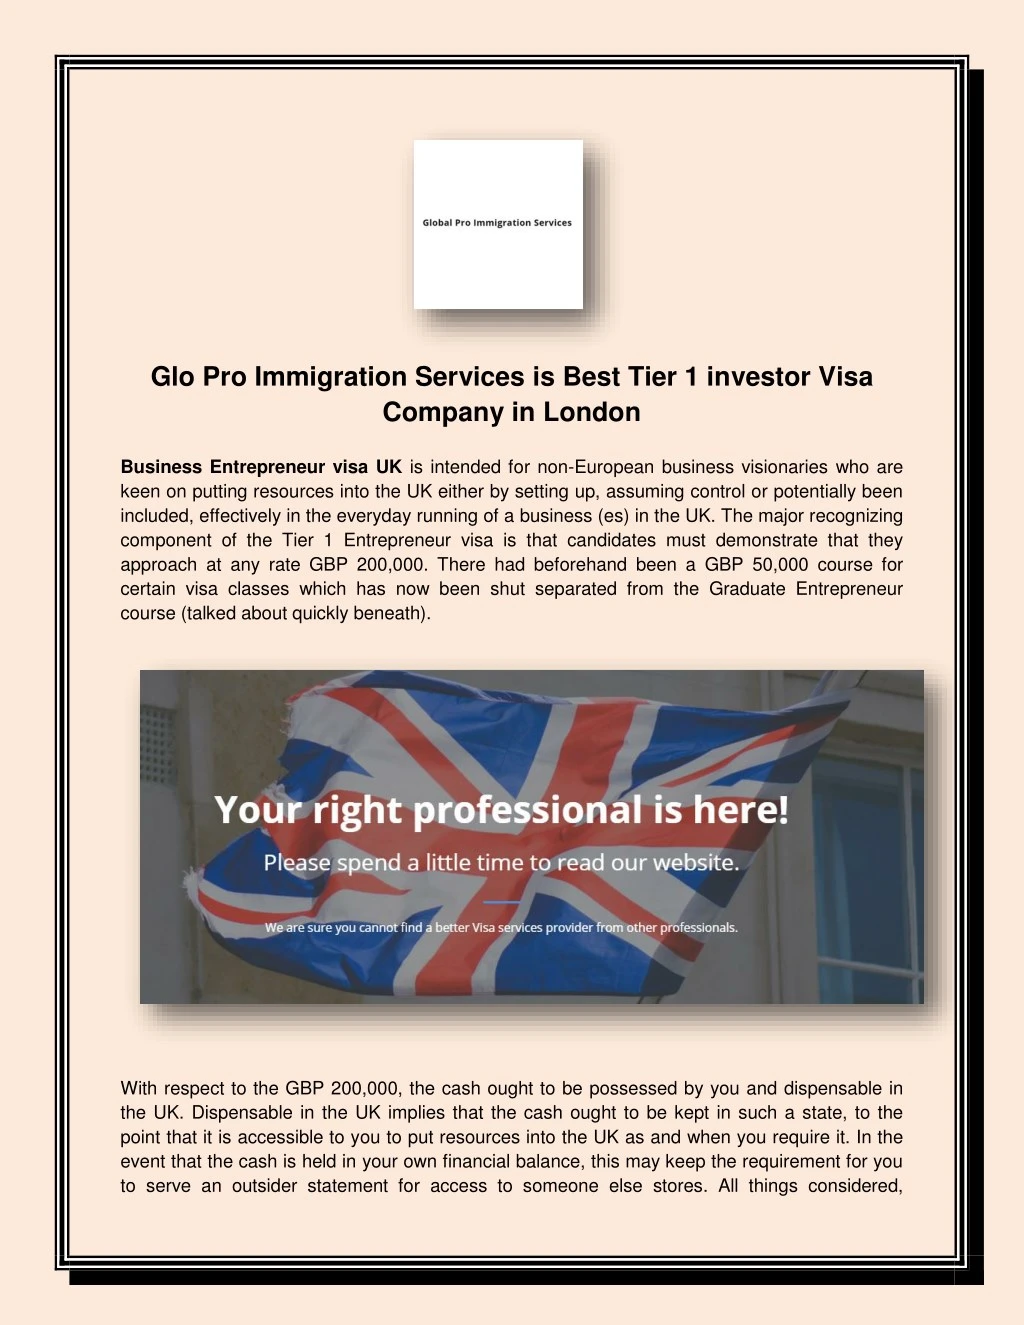 glo pro immigration services is best tier